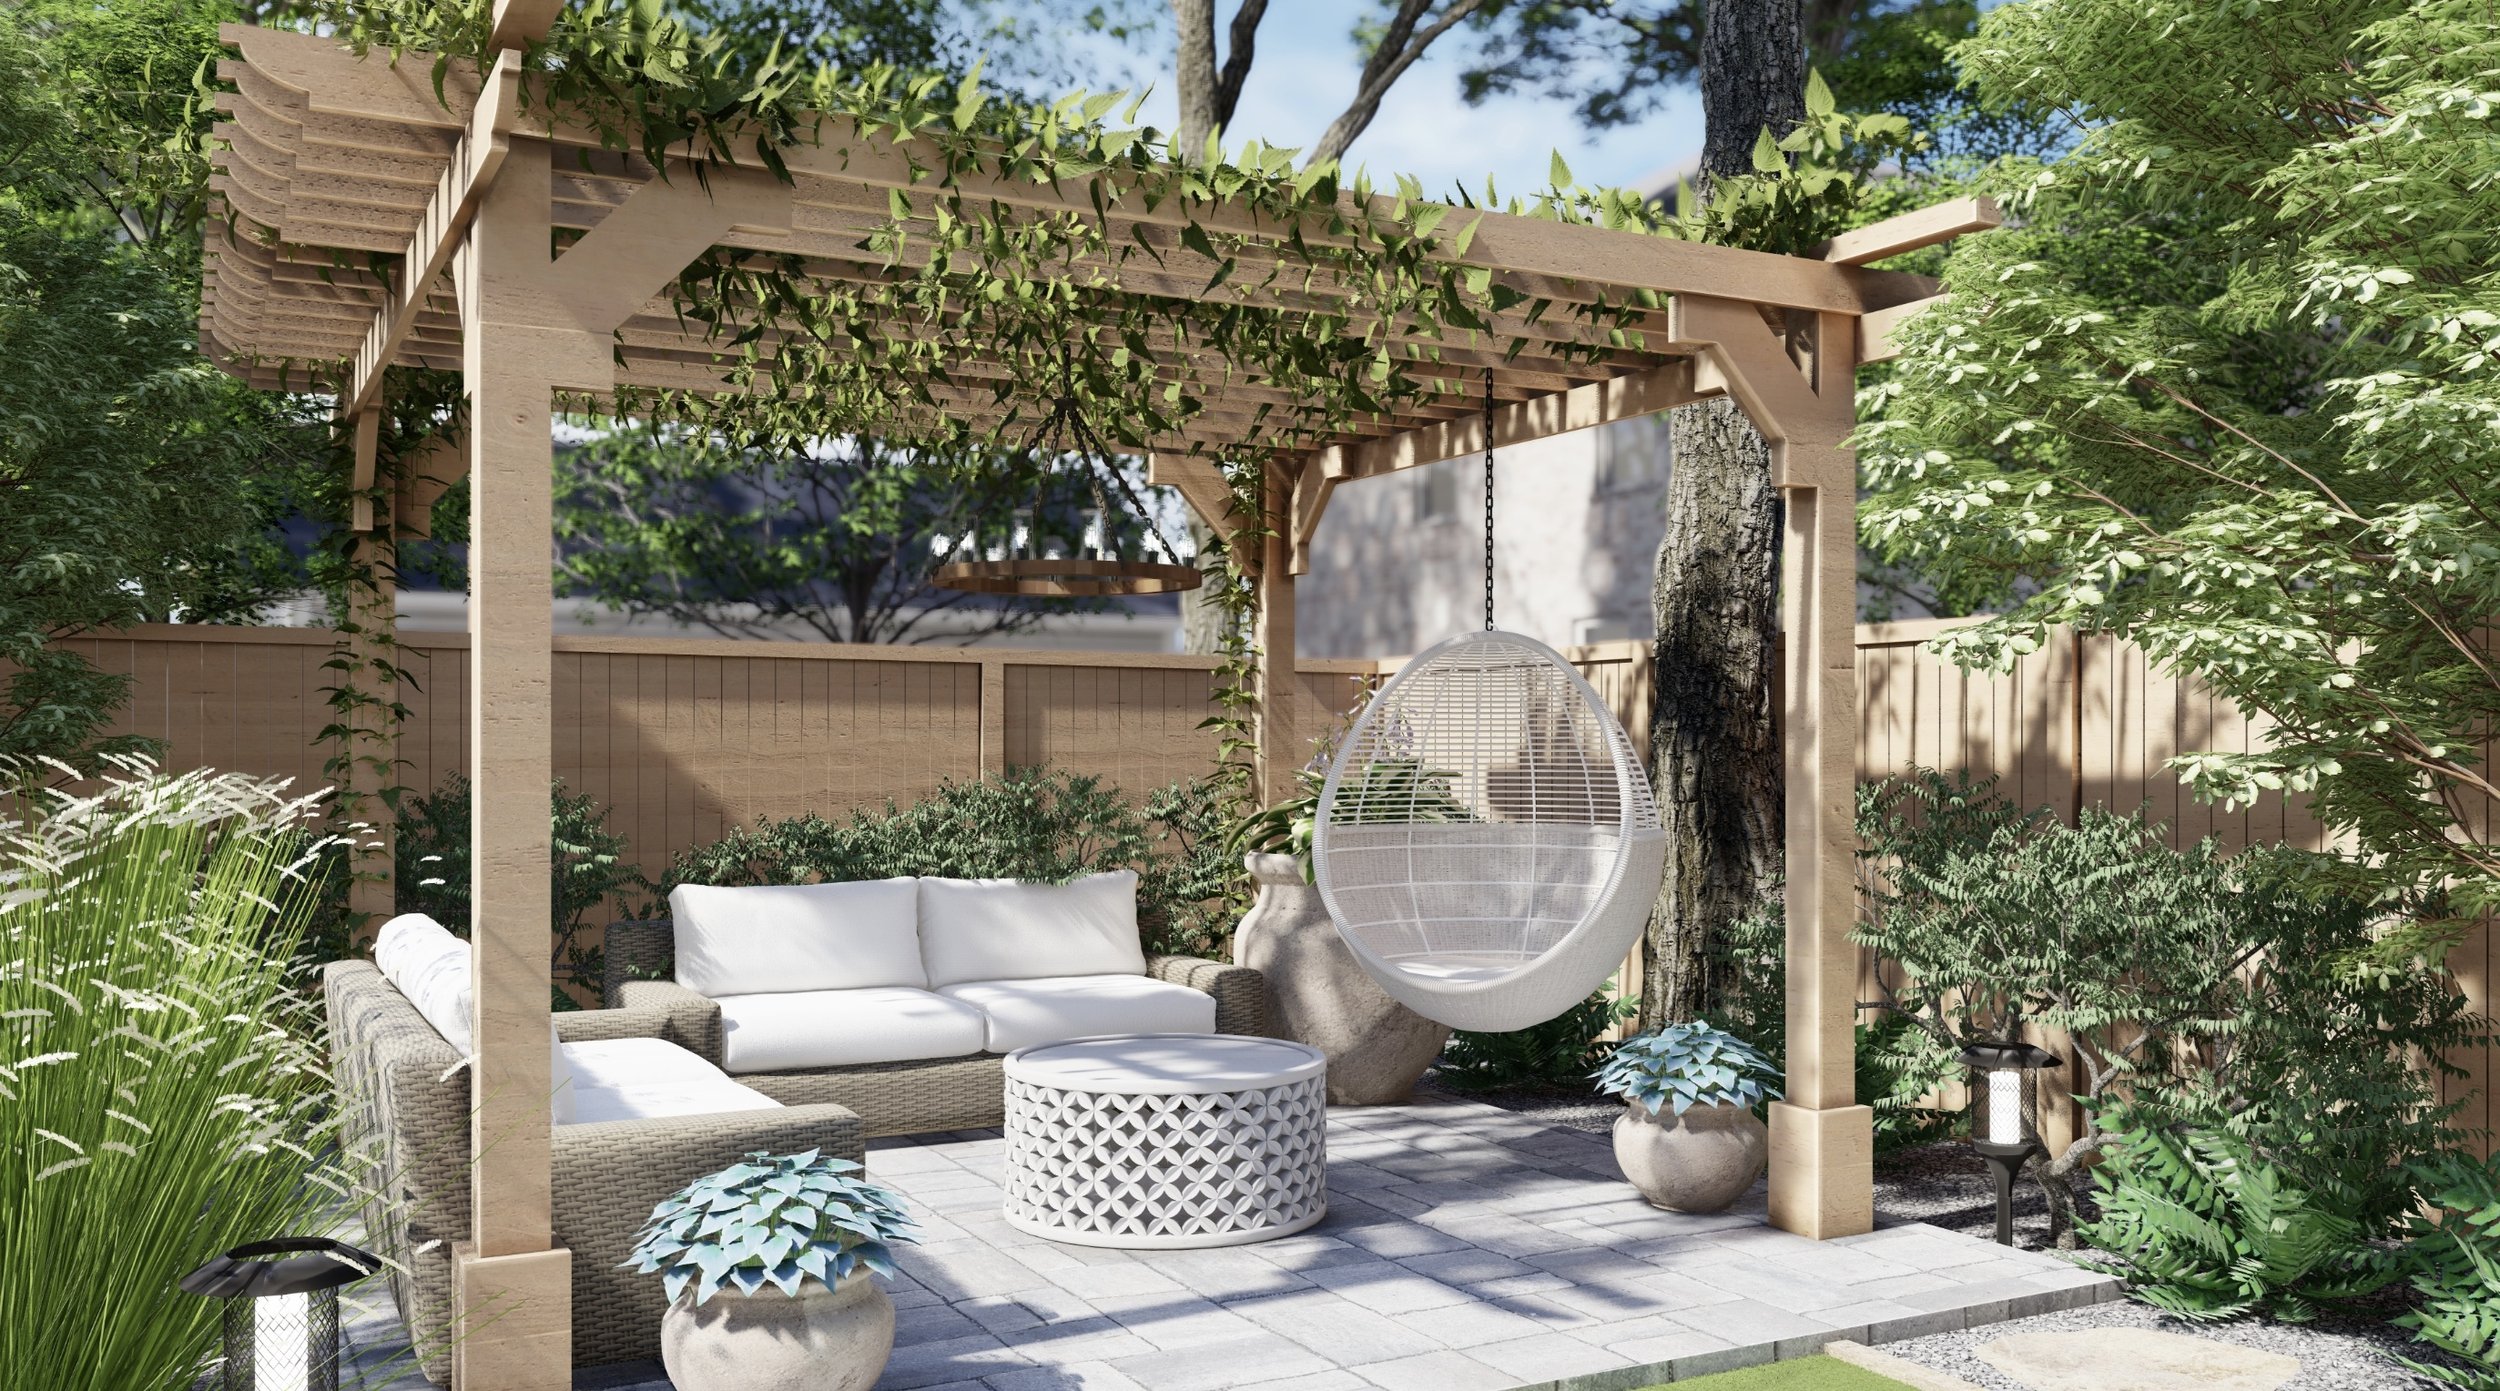 Bohemian landscape design with wicker sofas, hanging chair and vine-covered pergola.